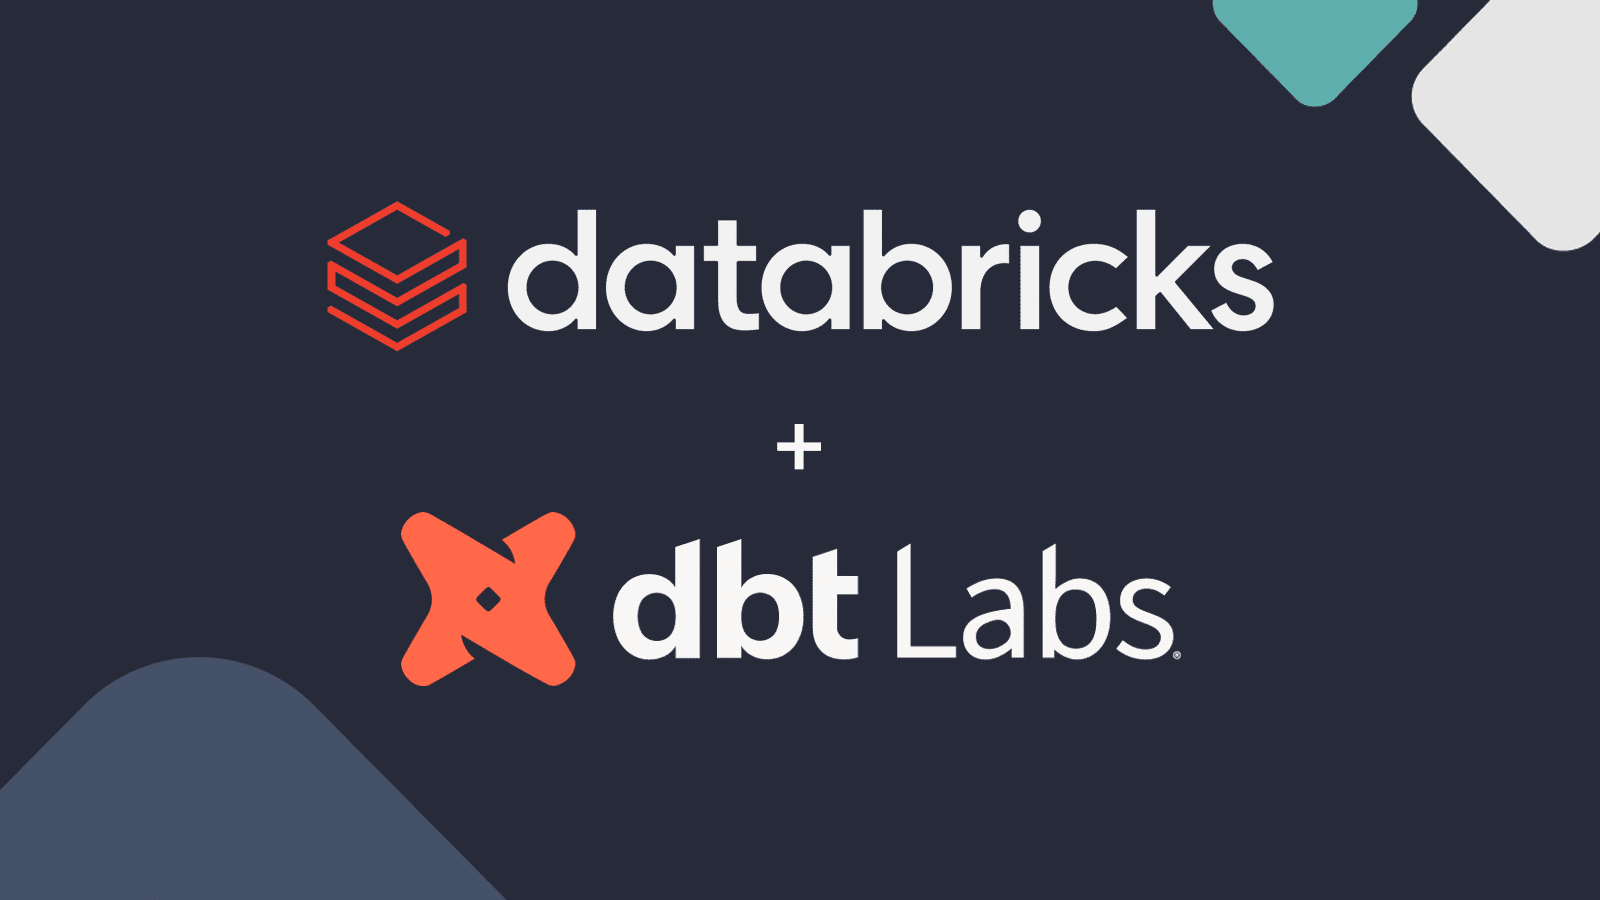 The dbt Cloud + Databricks experience is getting even better